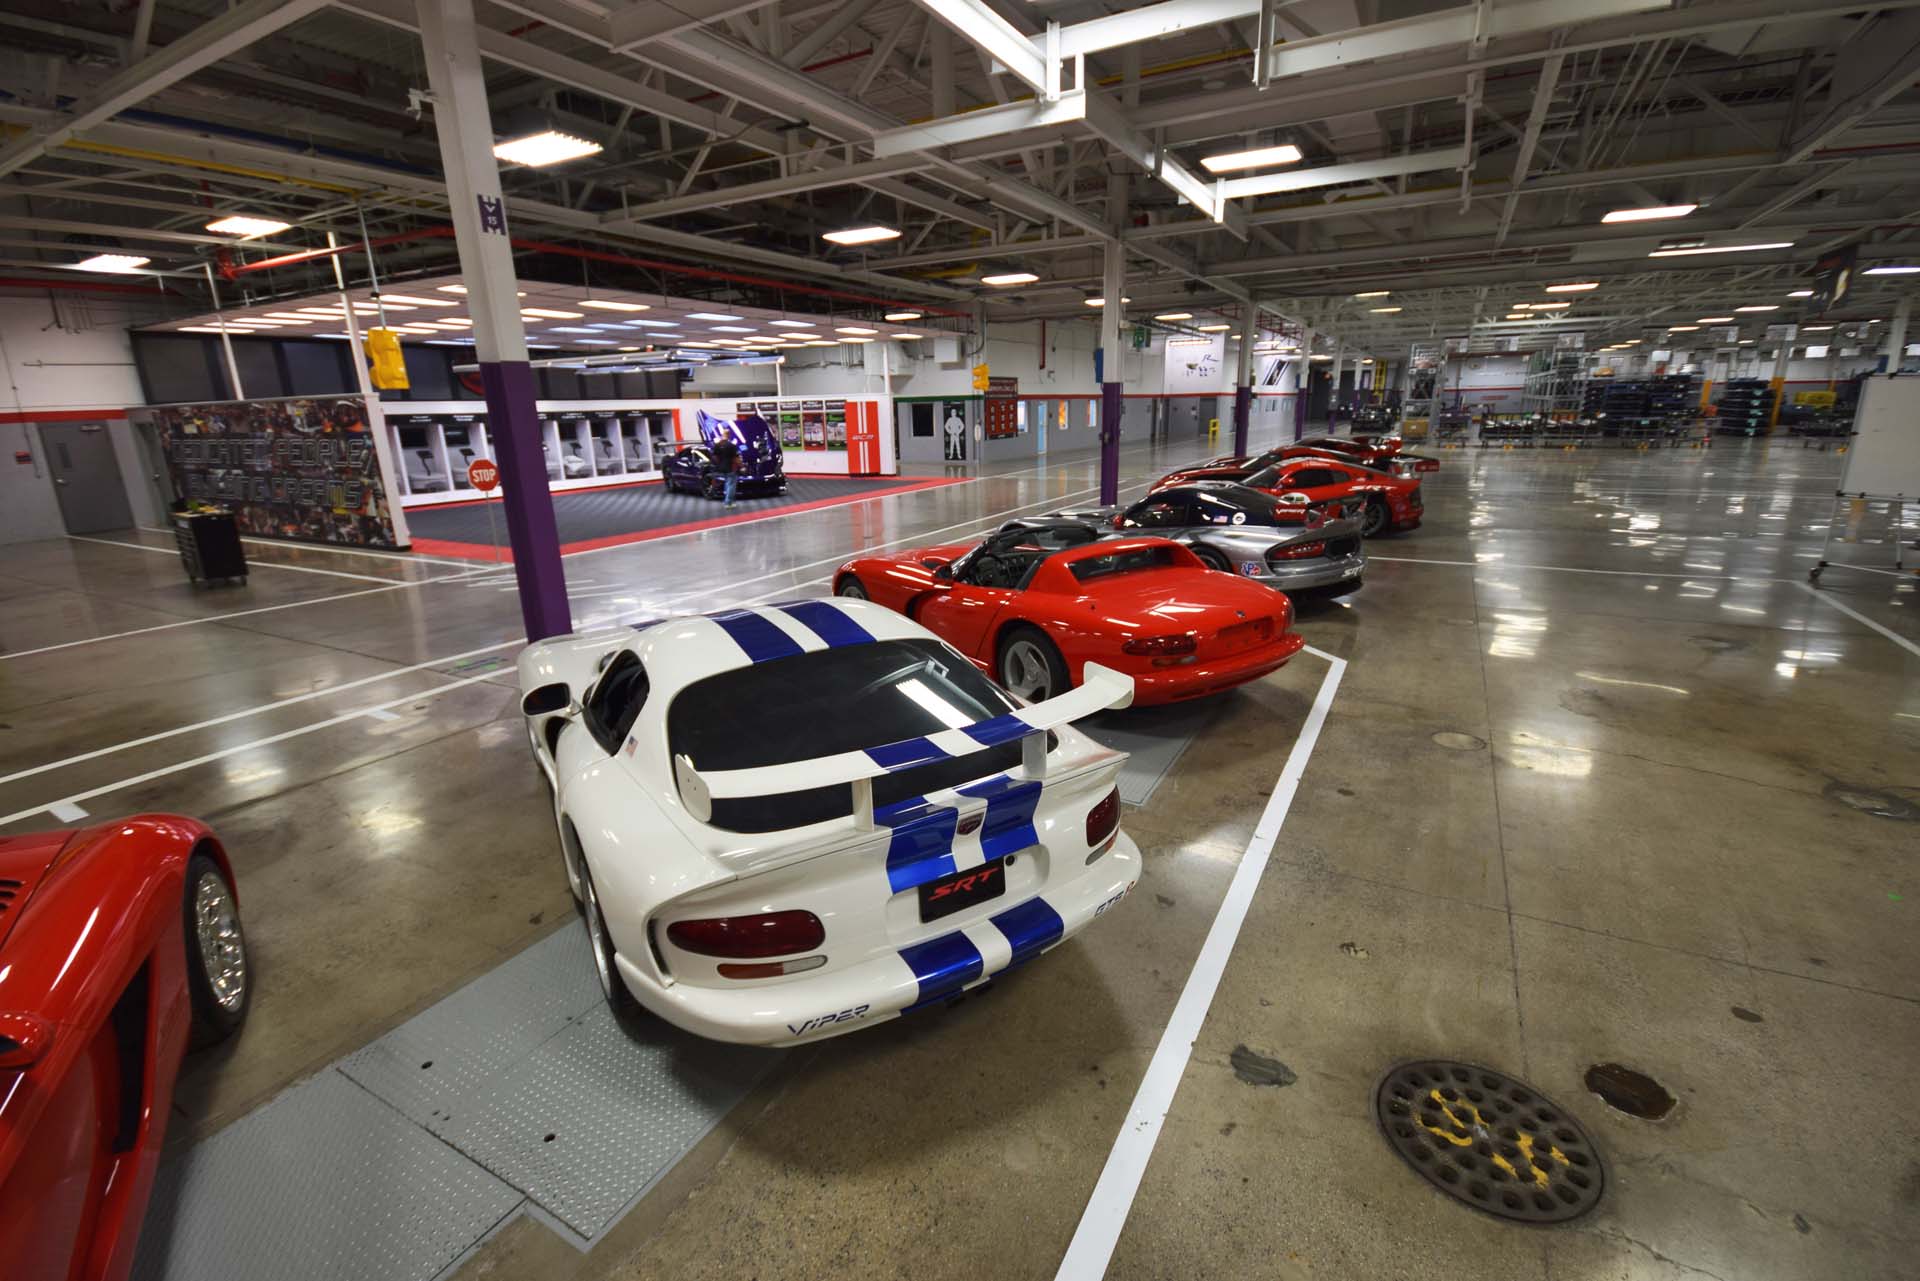 Just inside the front doors and in front of the main assembly area, a selection of retired Dodge Vipers are on perpetual display. Race-cars, concepts and production models are lined up, reminding workers of the storied history of the Viper. They also form a unique centrepiece for visiting owners and customers, reminding them of the model’s heritage. See the purple Viper in the background? That’s the customer pick-up area, where lucky owners are encouraged to take delivery of their new Viper, just across the floor from the selection of retired models.